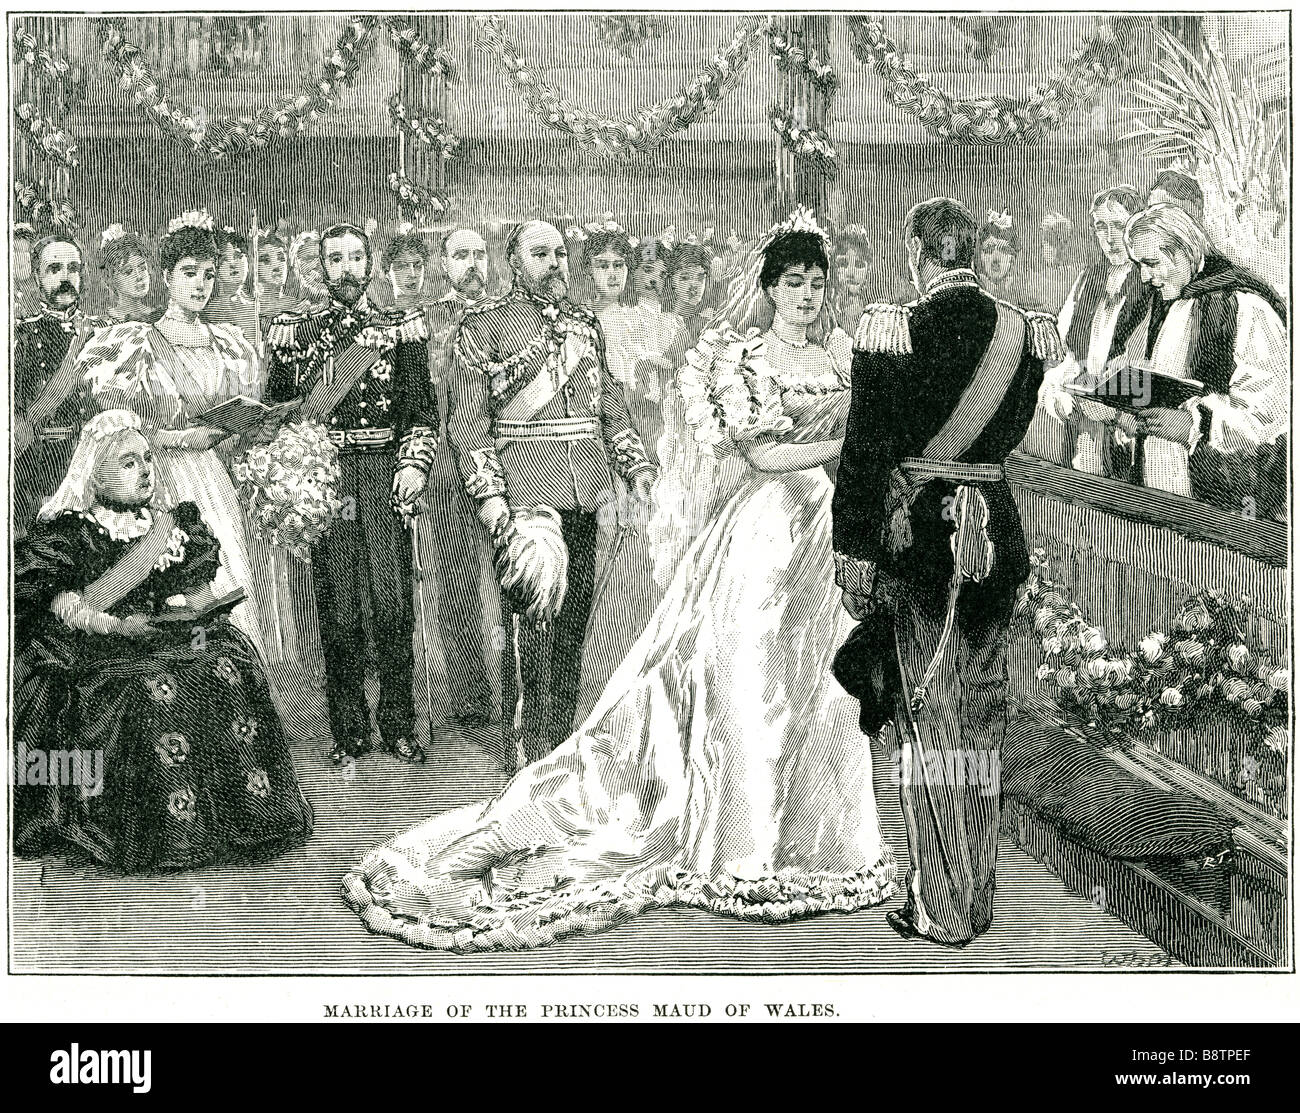 marriage of the princess maud of wales Maud of Wales (Maud Charlotte Mary Victoria; 26 November 1869 – 20 November 1938) was Que Stock Photo